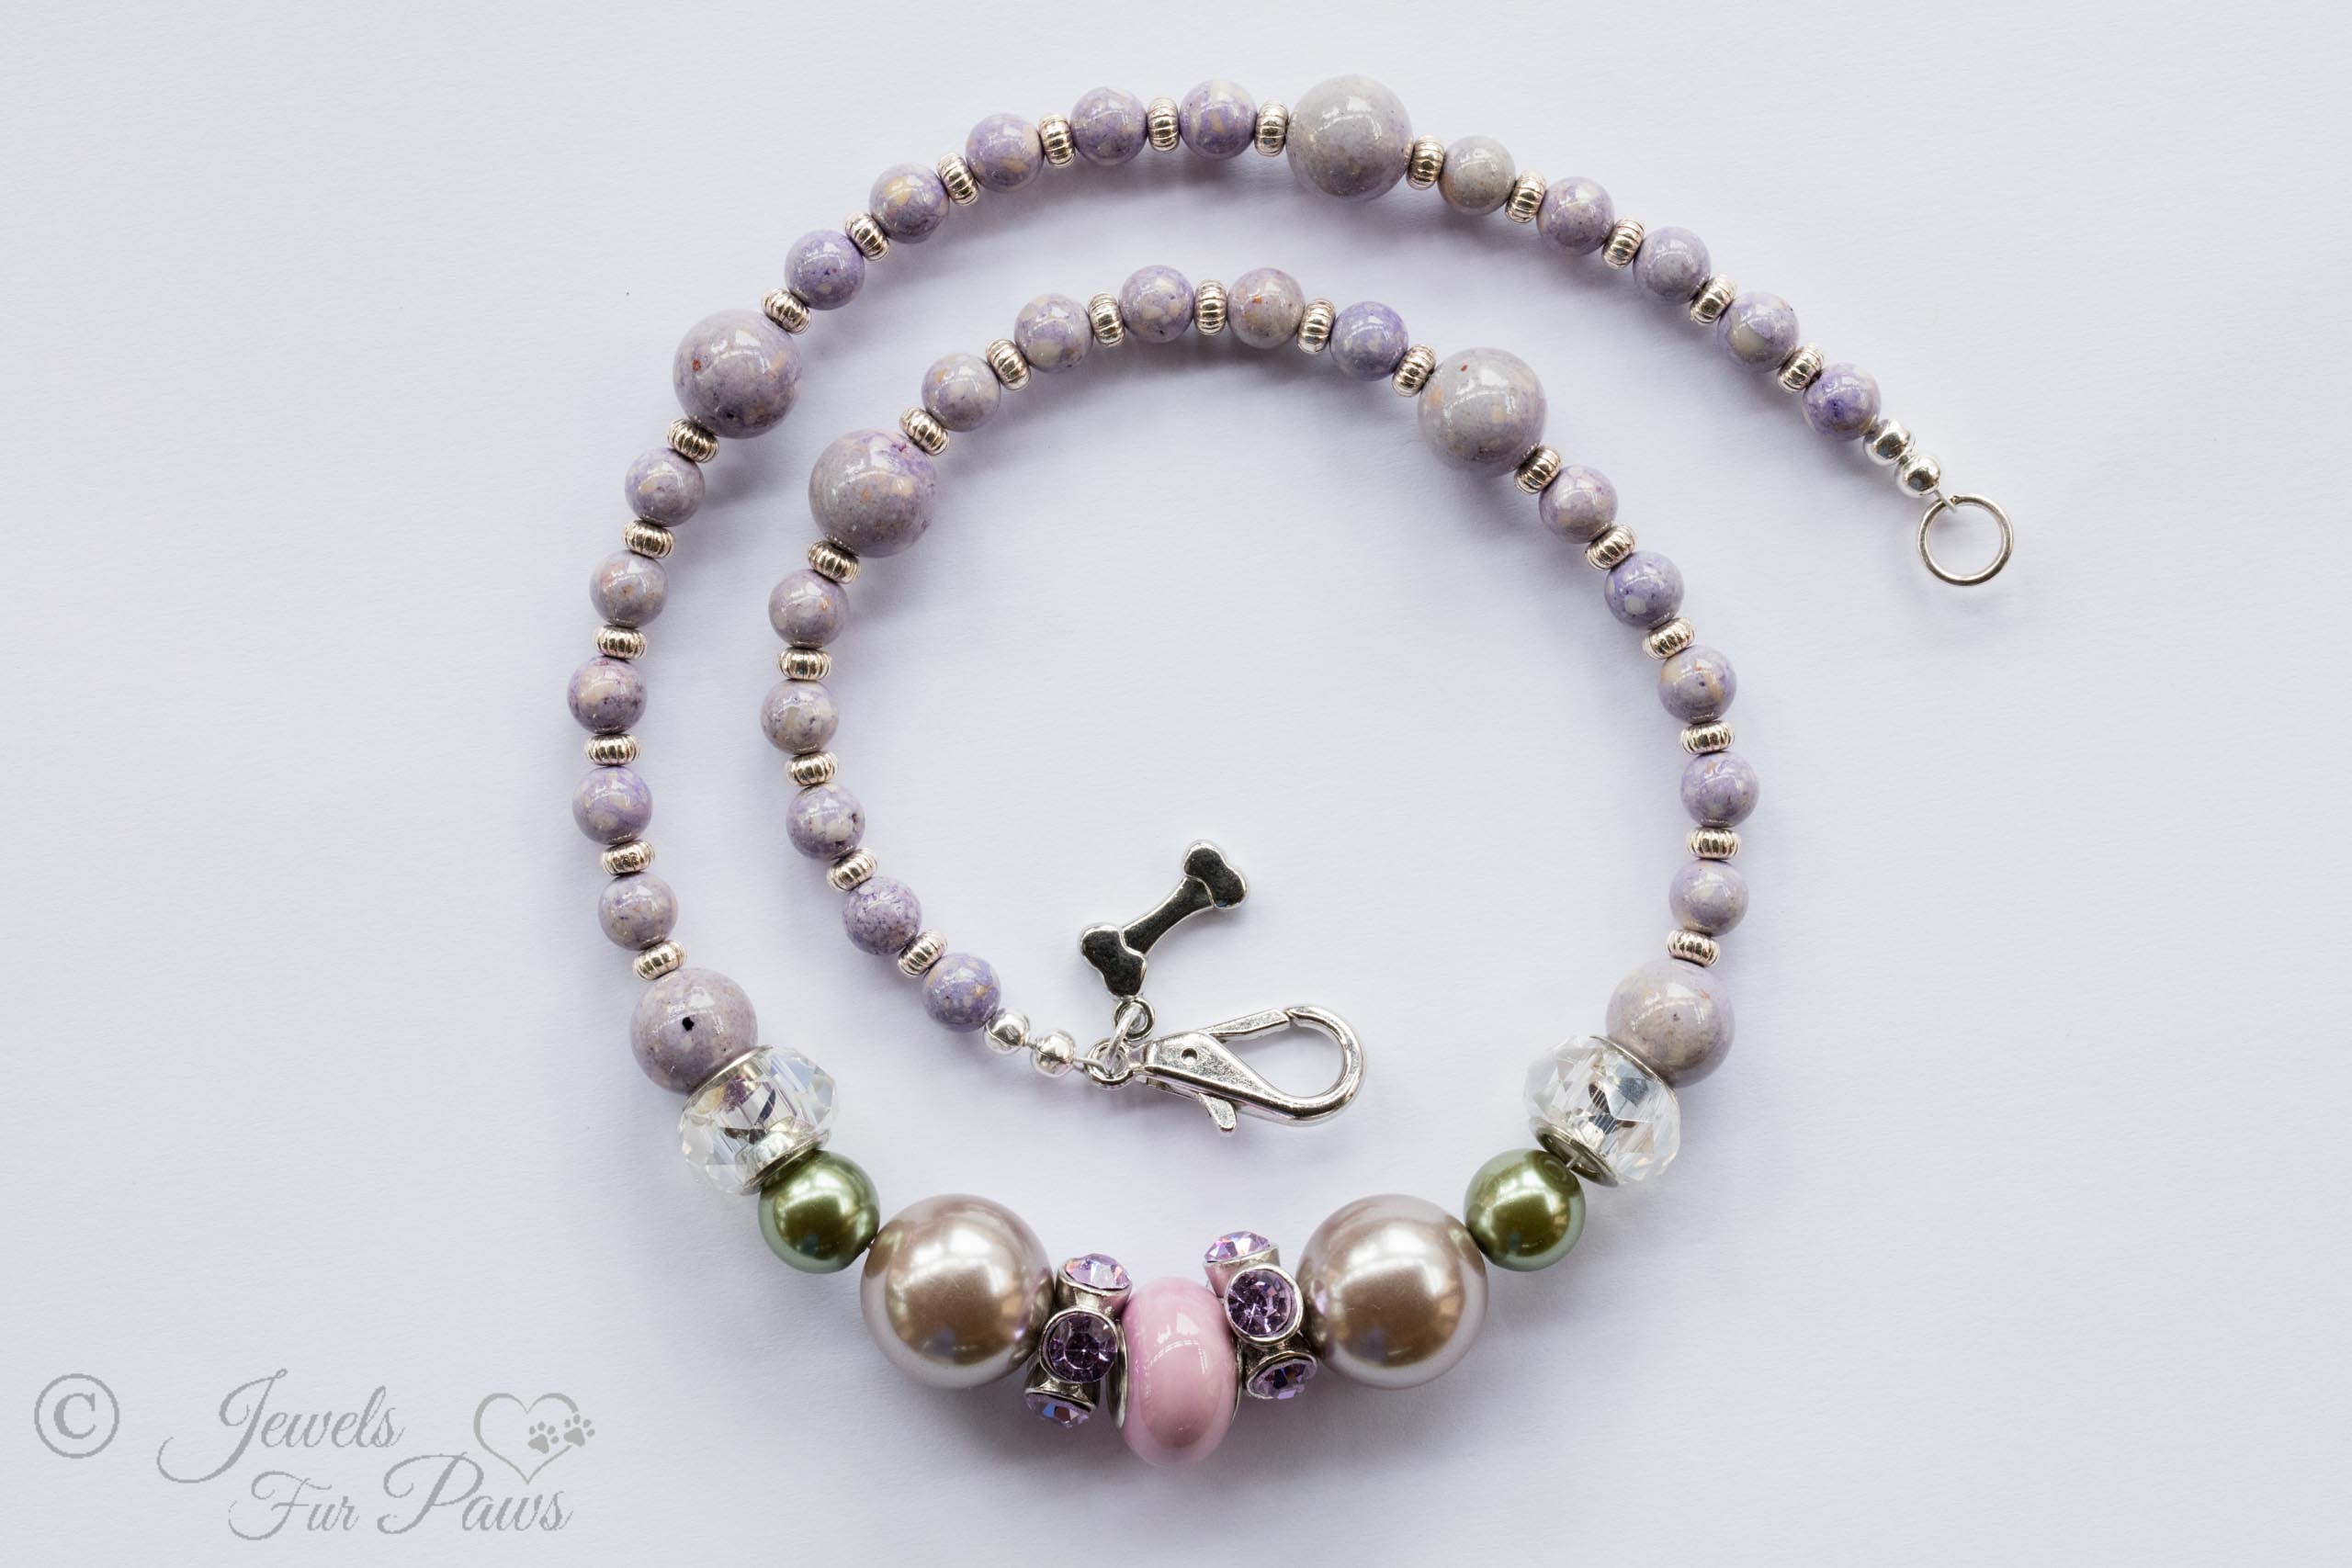 pale pink round bead wtih purple swarovski crystal spacers, two silver pearl beads, two olive green pearl beads, with lavender round beads and silver rondell spacers on a white background